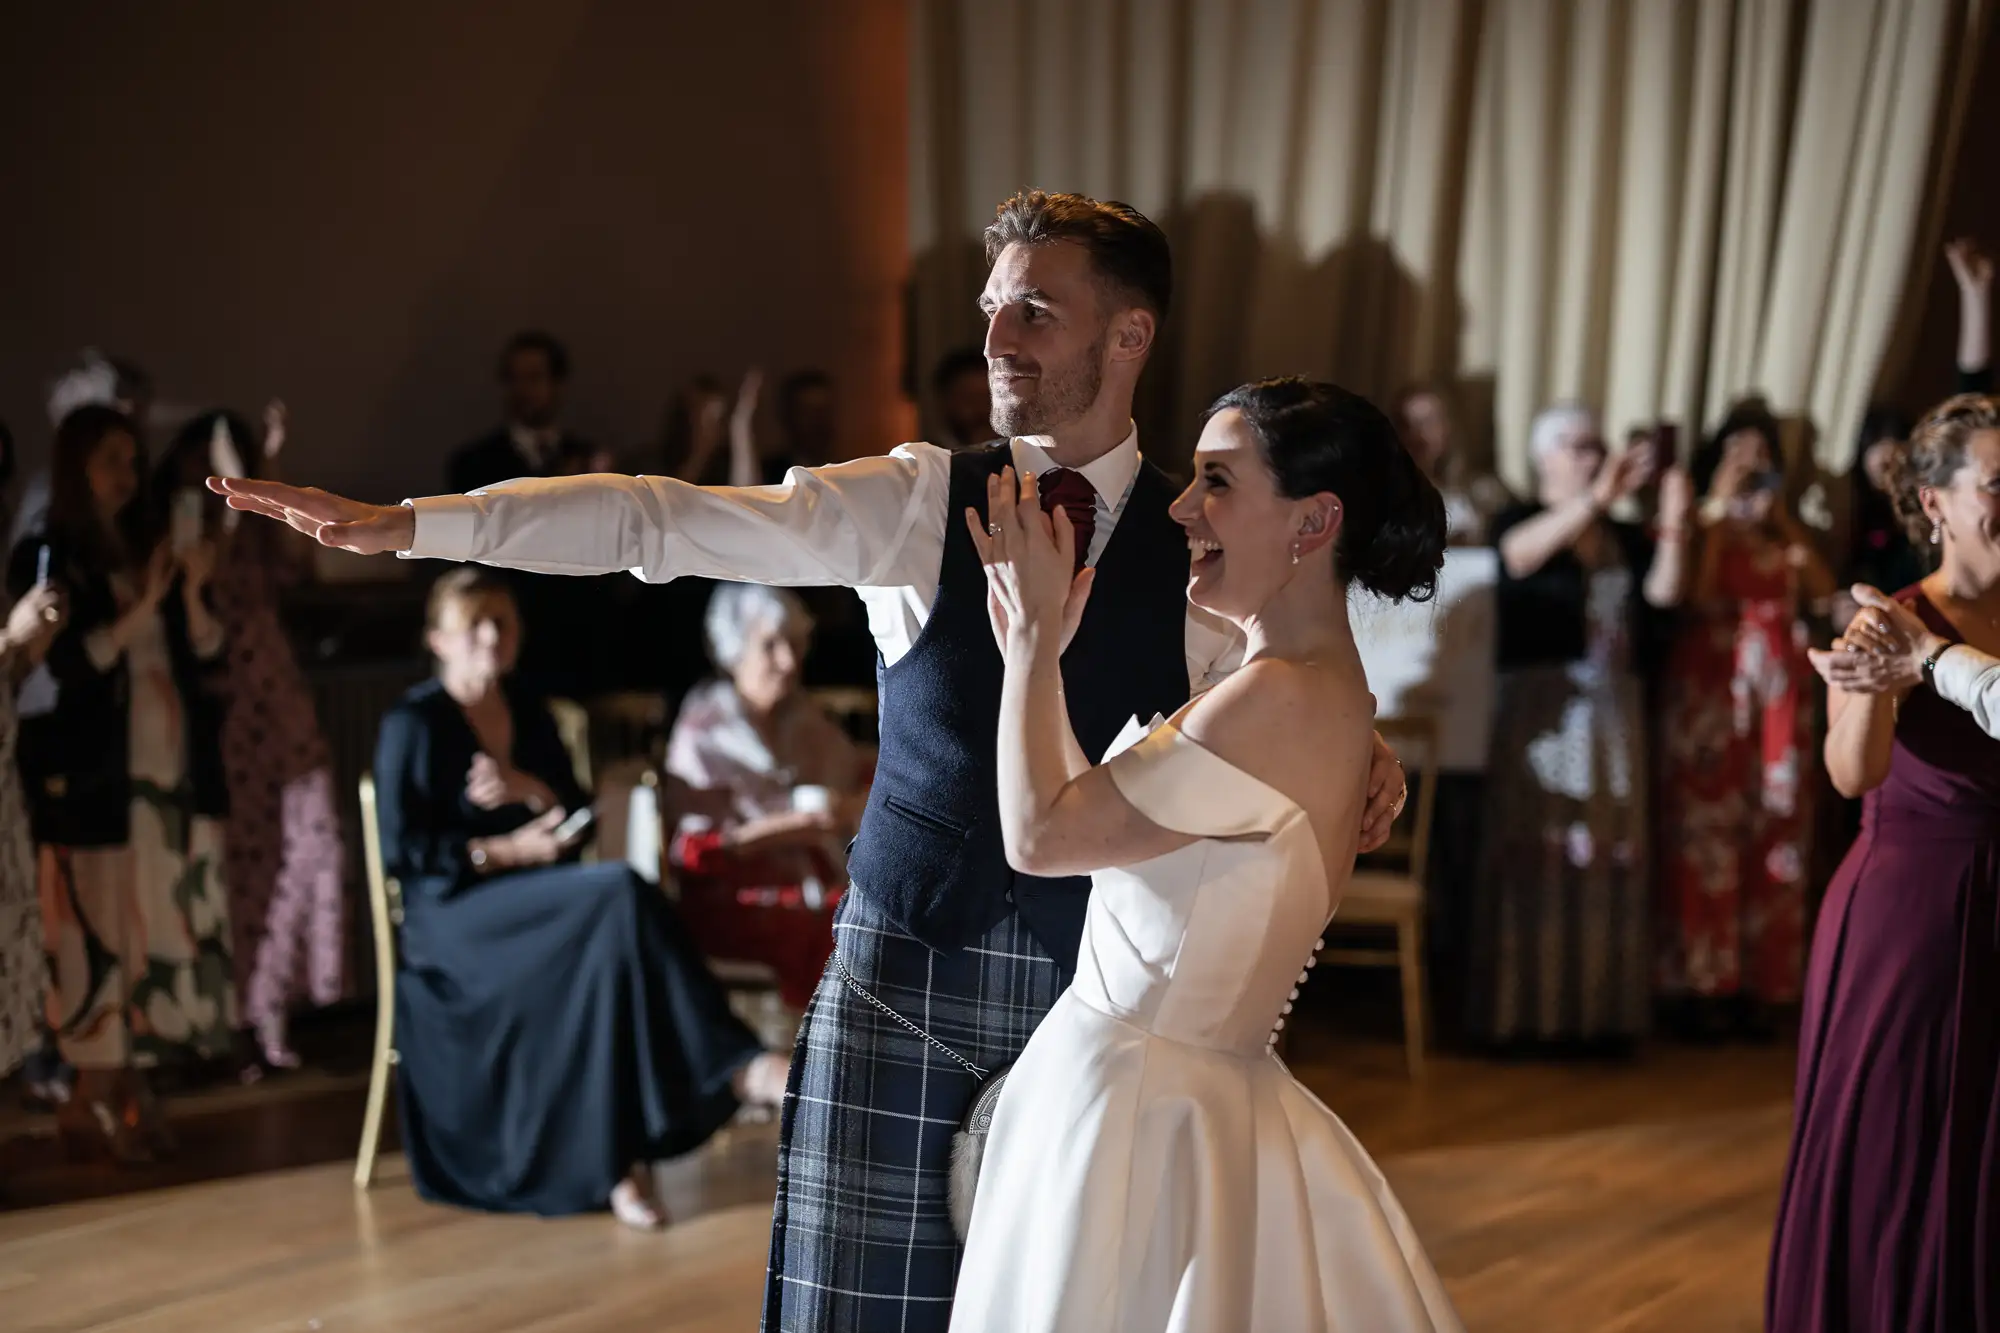 A bride and groom joyfully dancing in front of wedding guests, the bride in a white dress and the groom in a kilt.